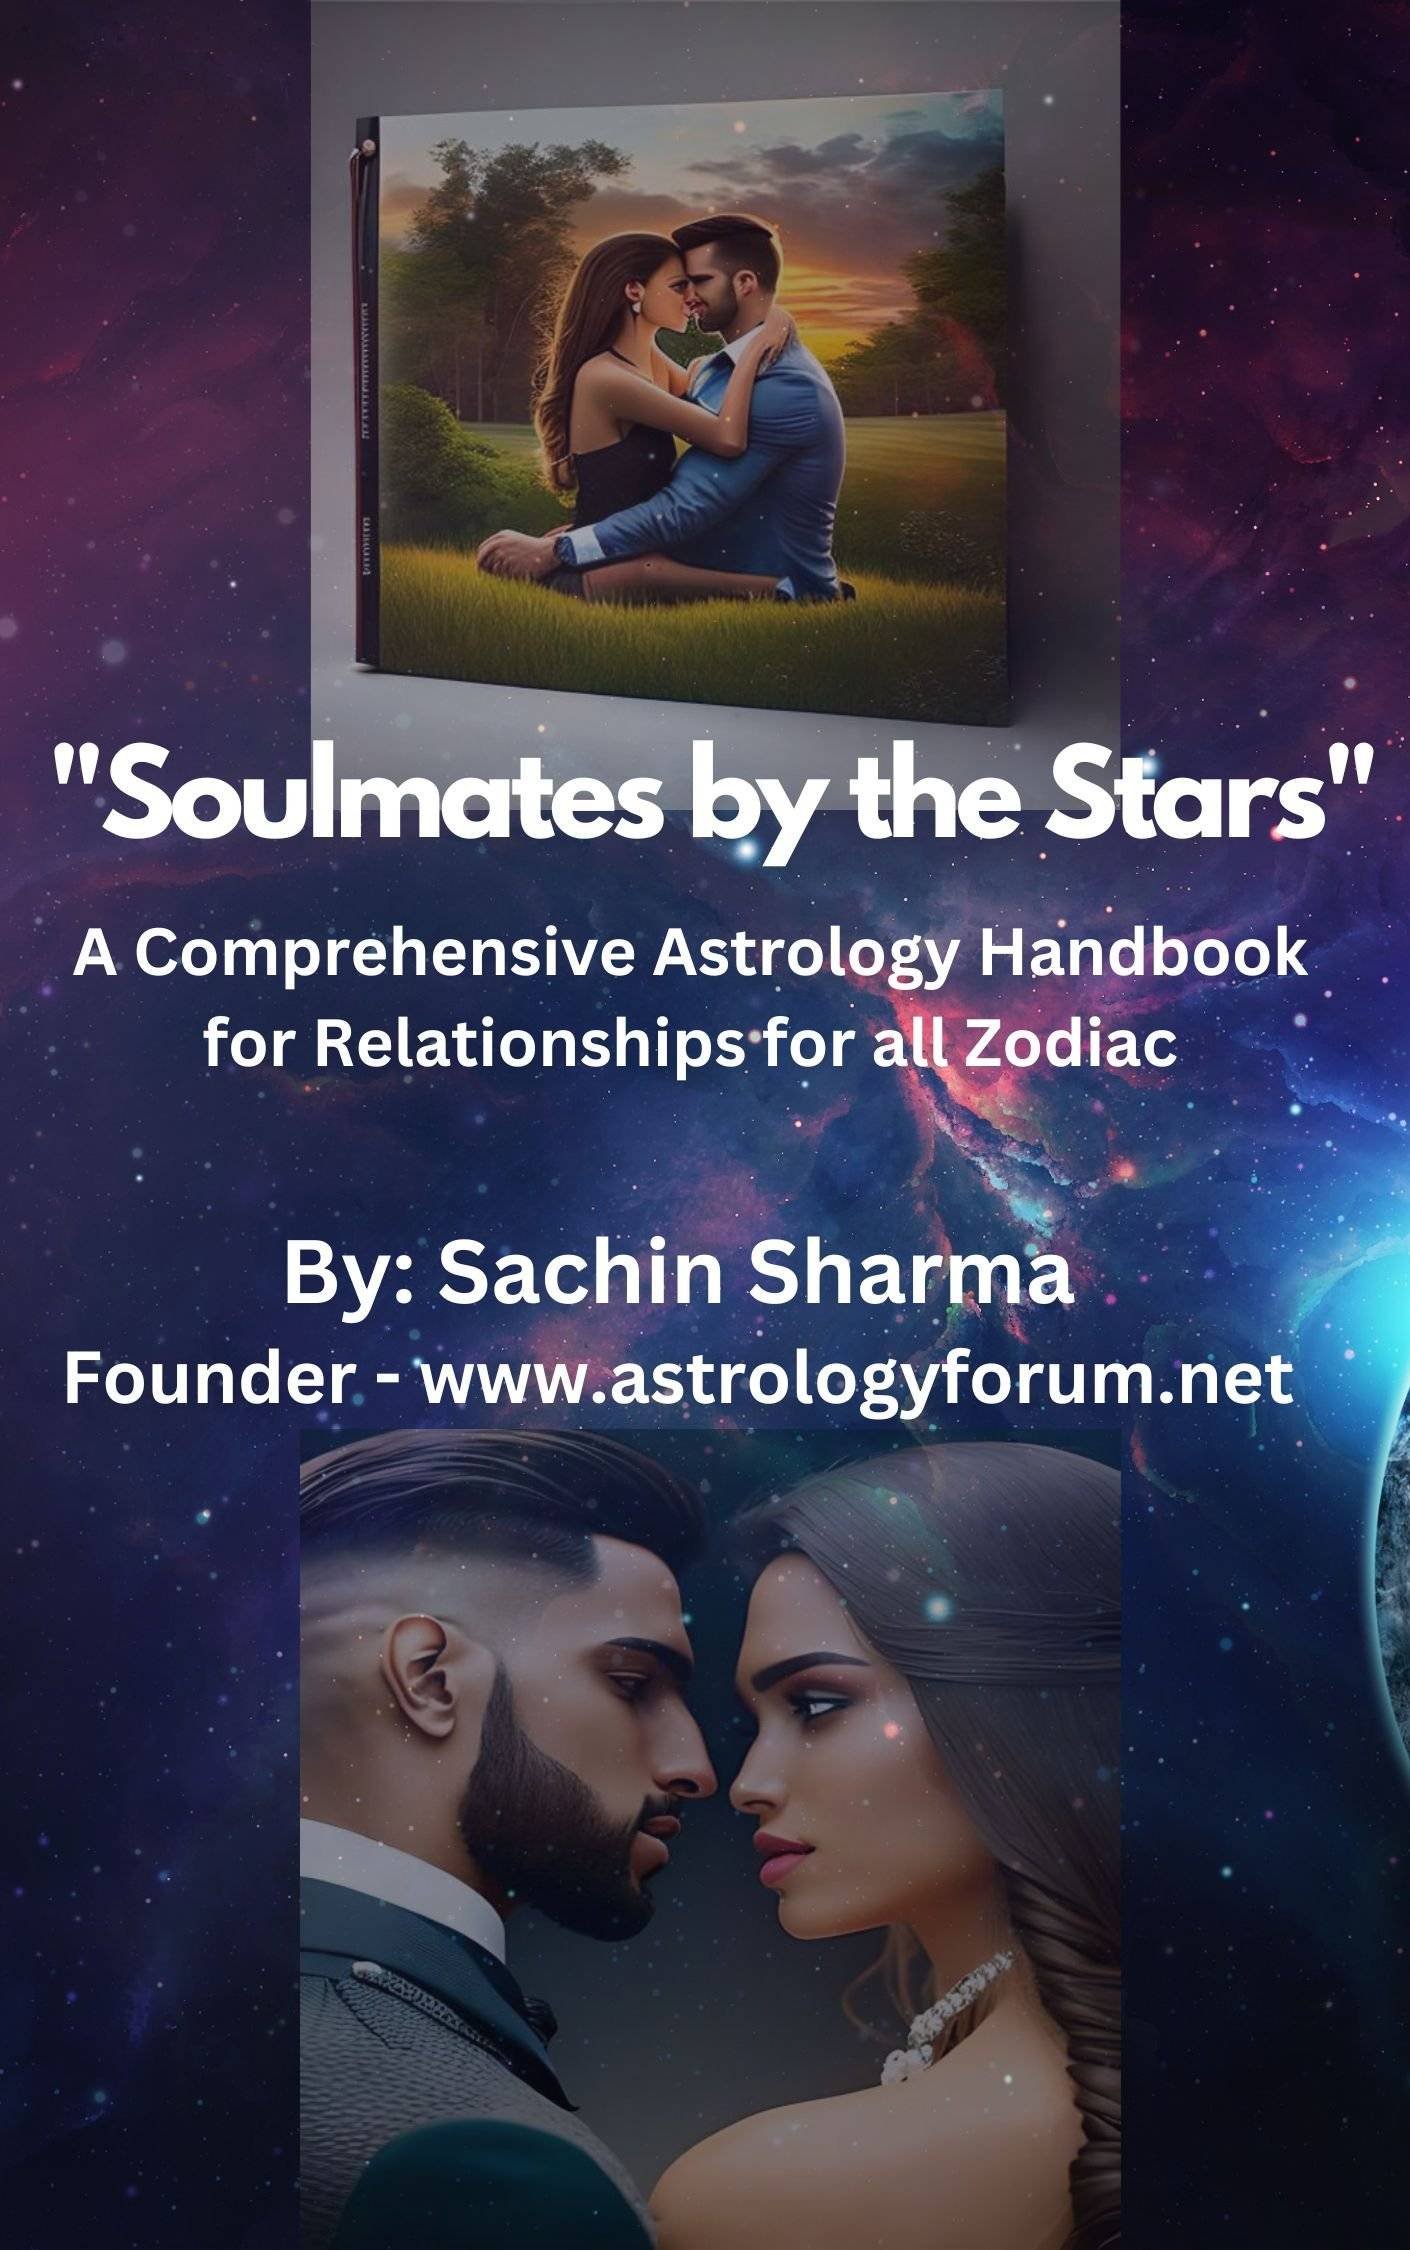 Soulmates by stars